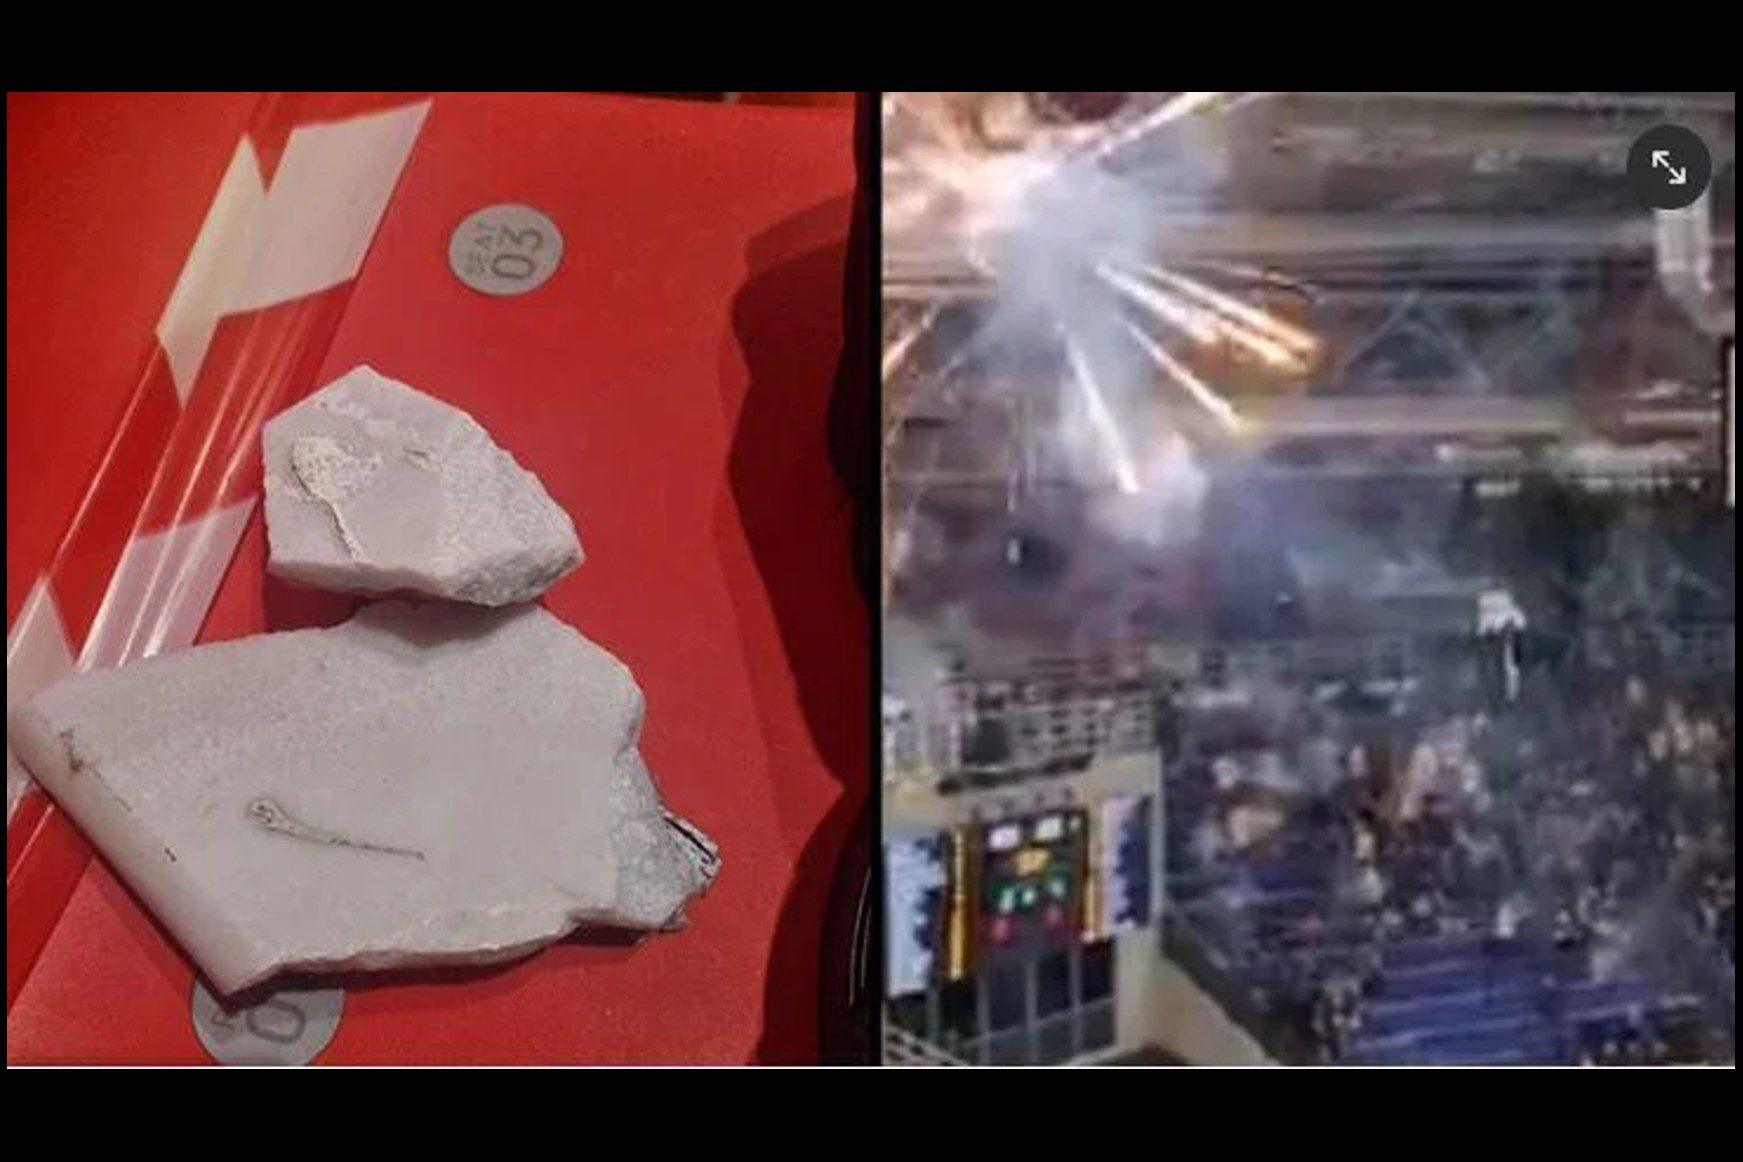 Stones and firecrackers thrown at Israeli fans in Athens during a basketball match (Photo: Hapoel Jerusalem )